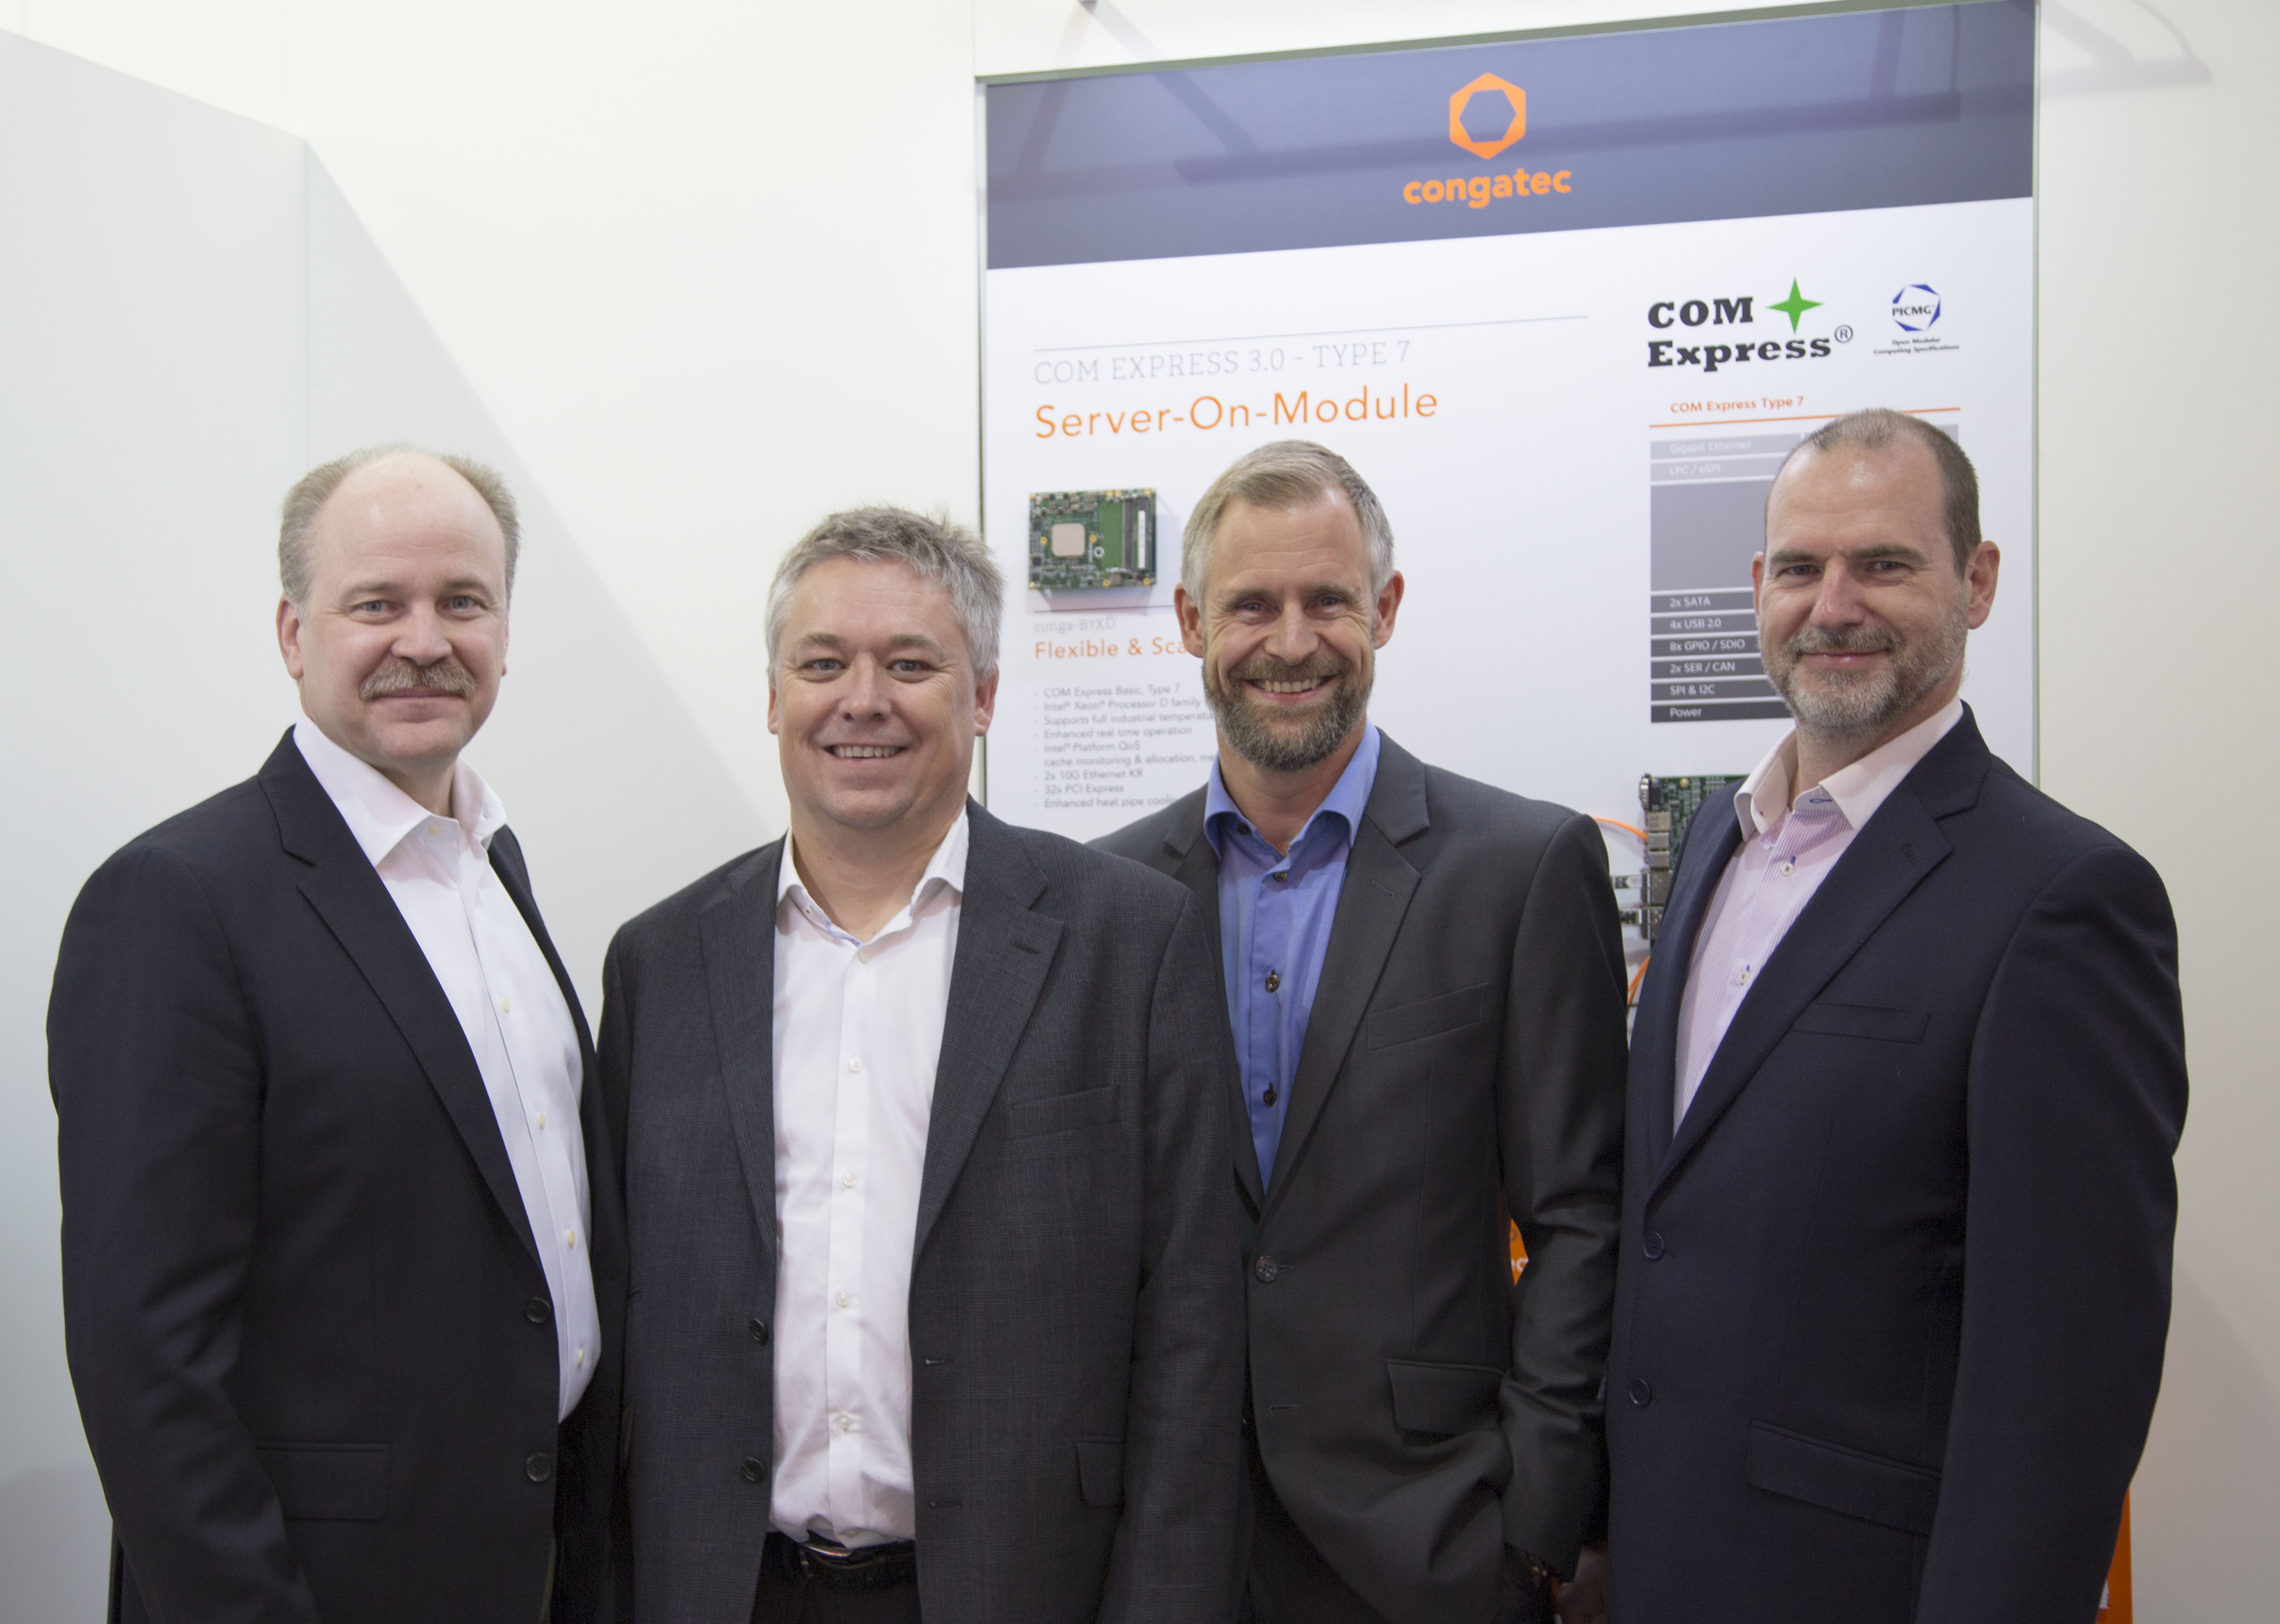 (From left) Jason Carlson, Martin Frederiksen, Anders Rasmussen, and John Moseley of congatec